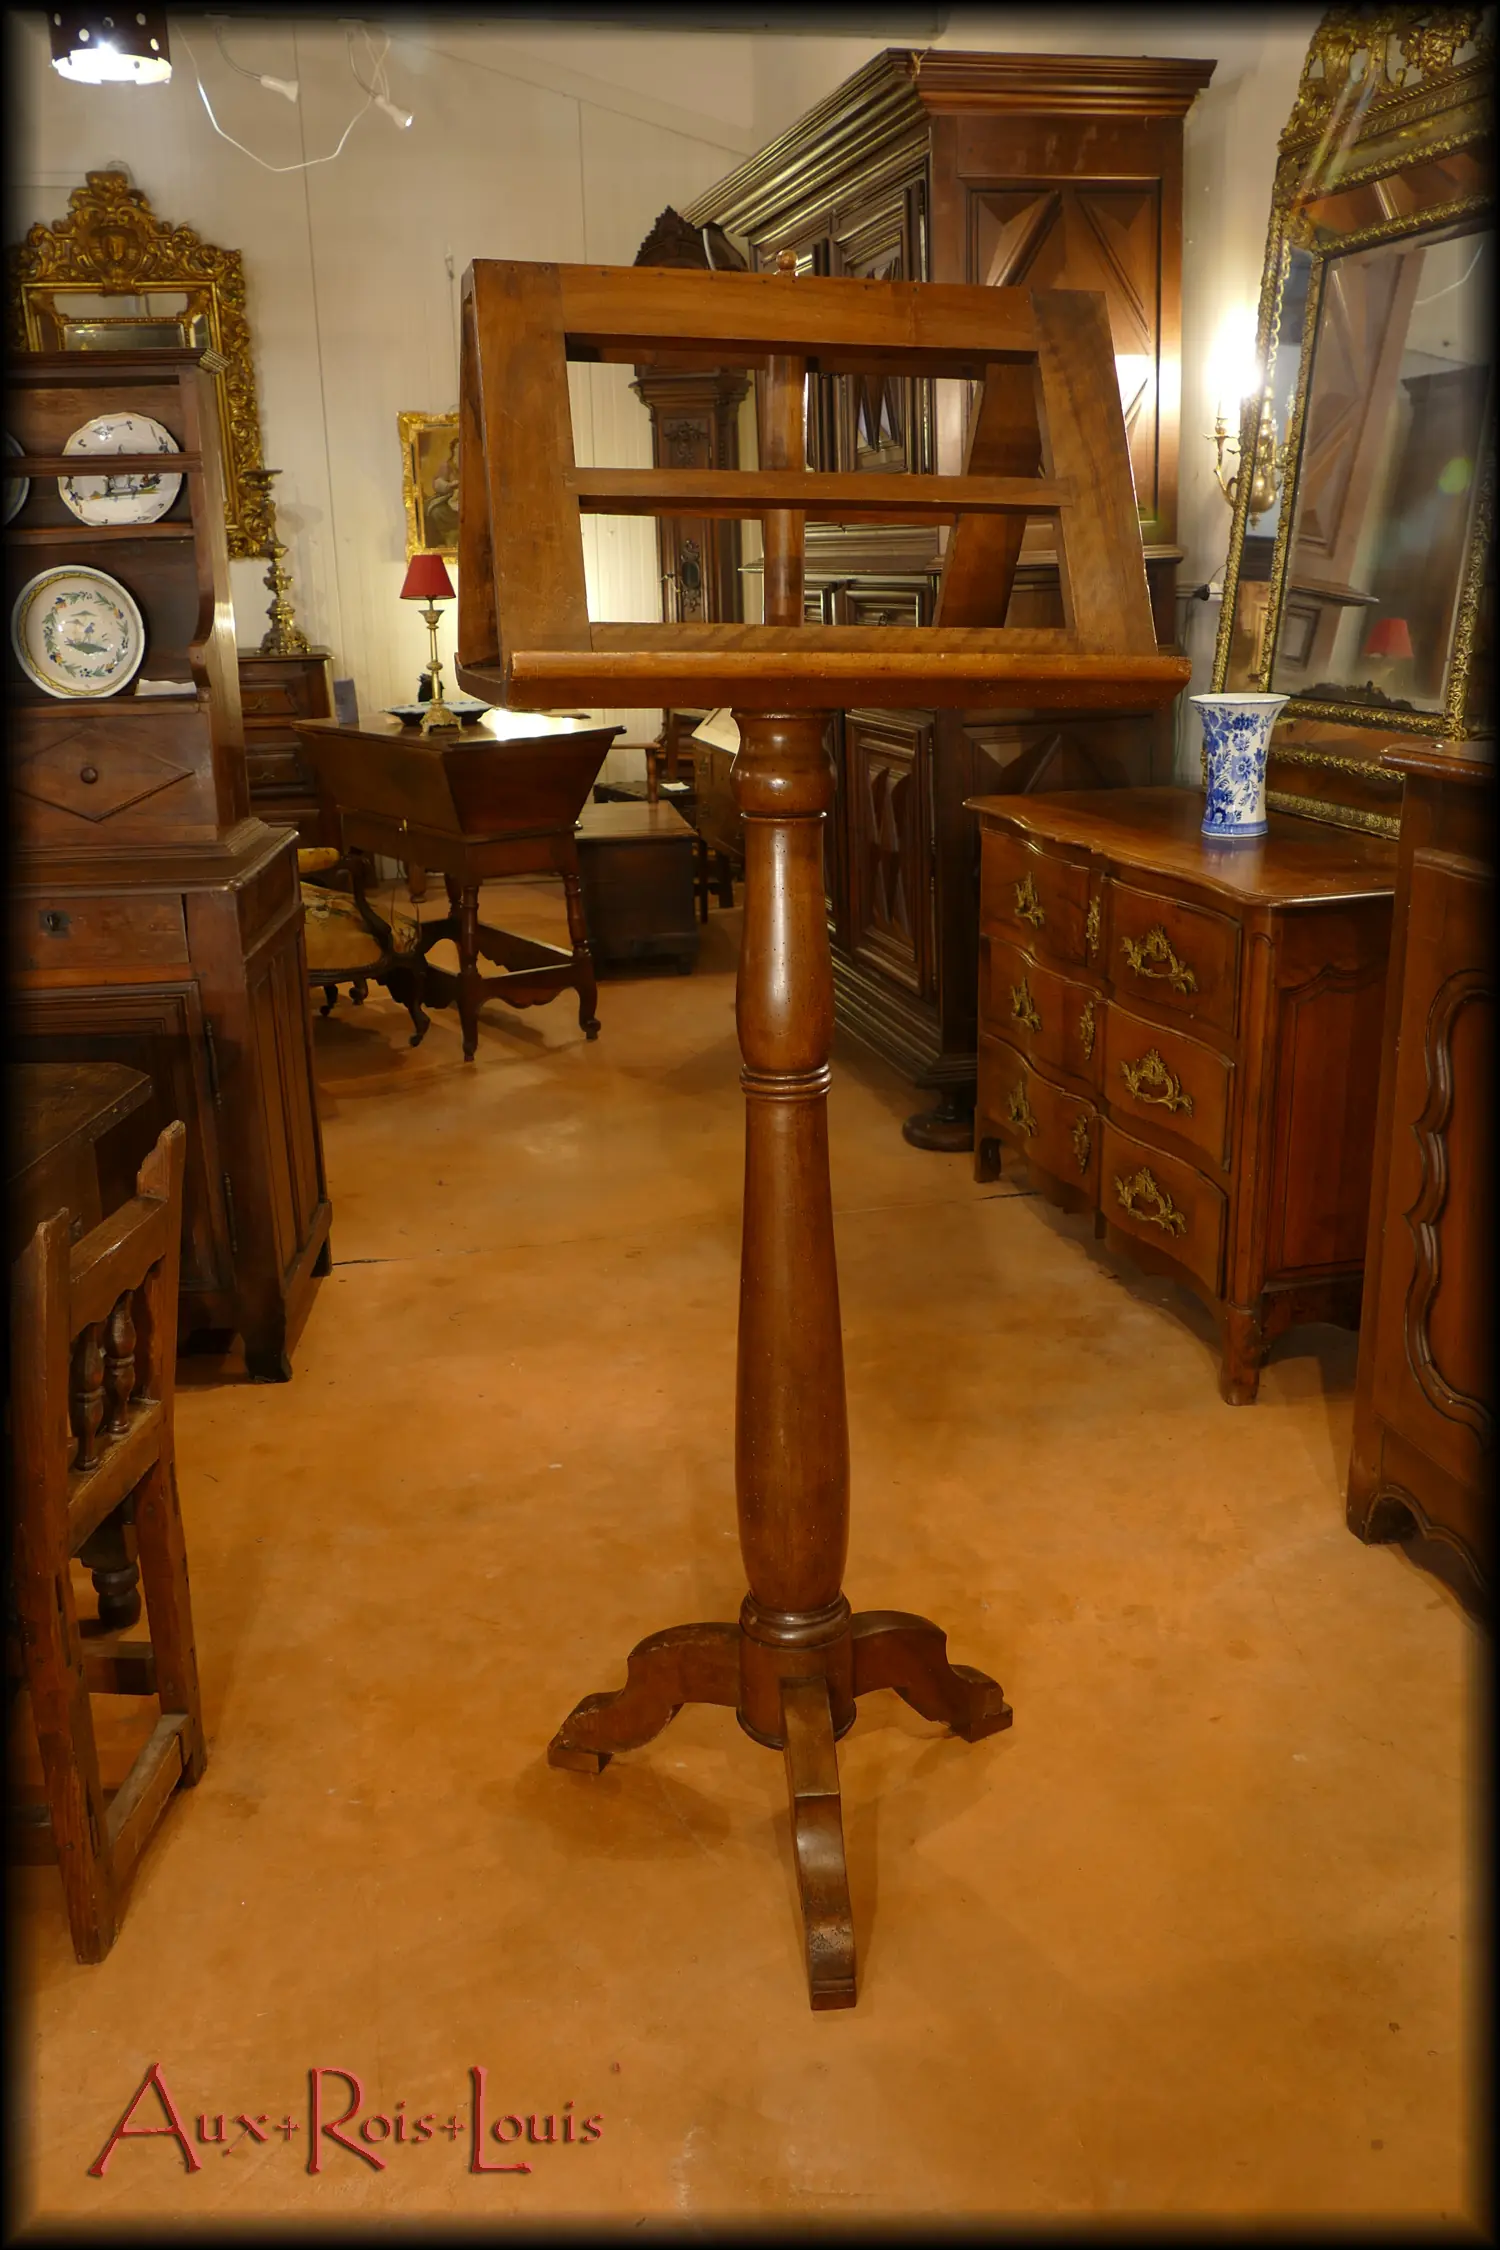 Here is an antique musician's lectern made of walnut from the 18th century in the Southwest region of France. It features a double openwork music stand resting on a solid wooden tablet, which contributes to its stability. Its base consists of three legs arranged in the manner of tree roots, ensuring its balance.